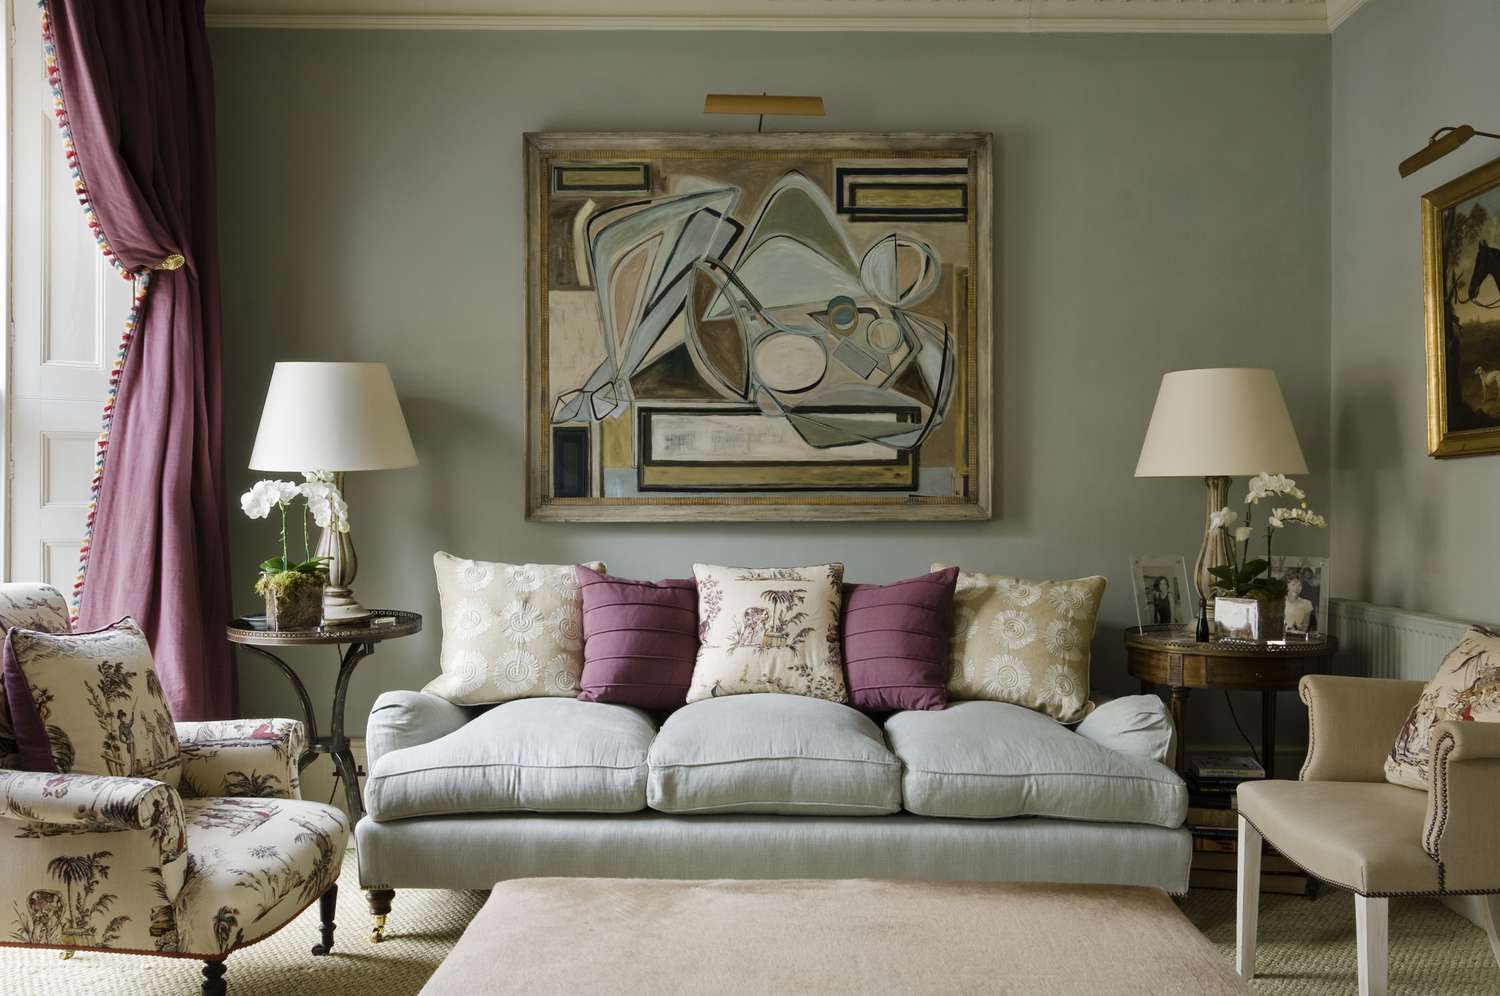 How To Choose A Painting For Living Room